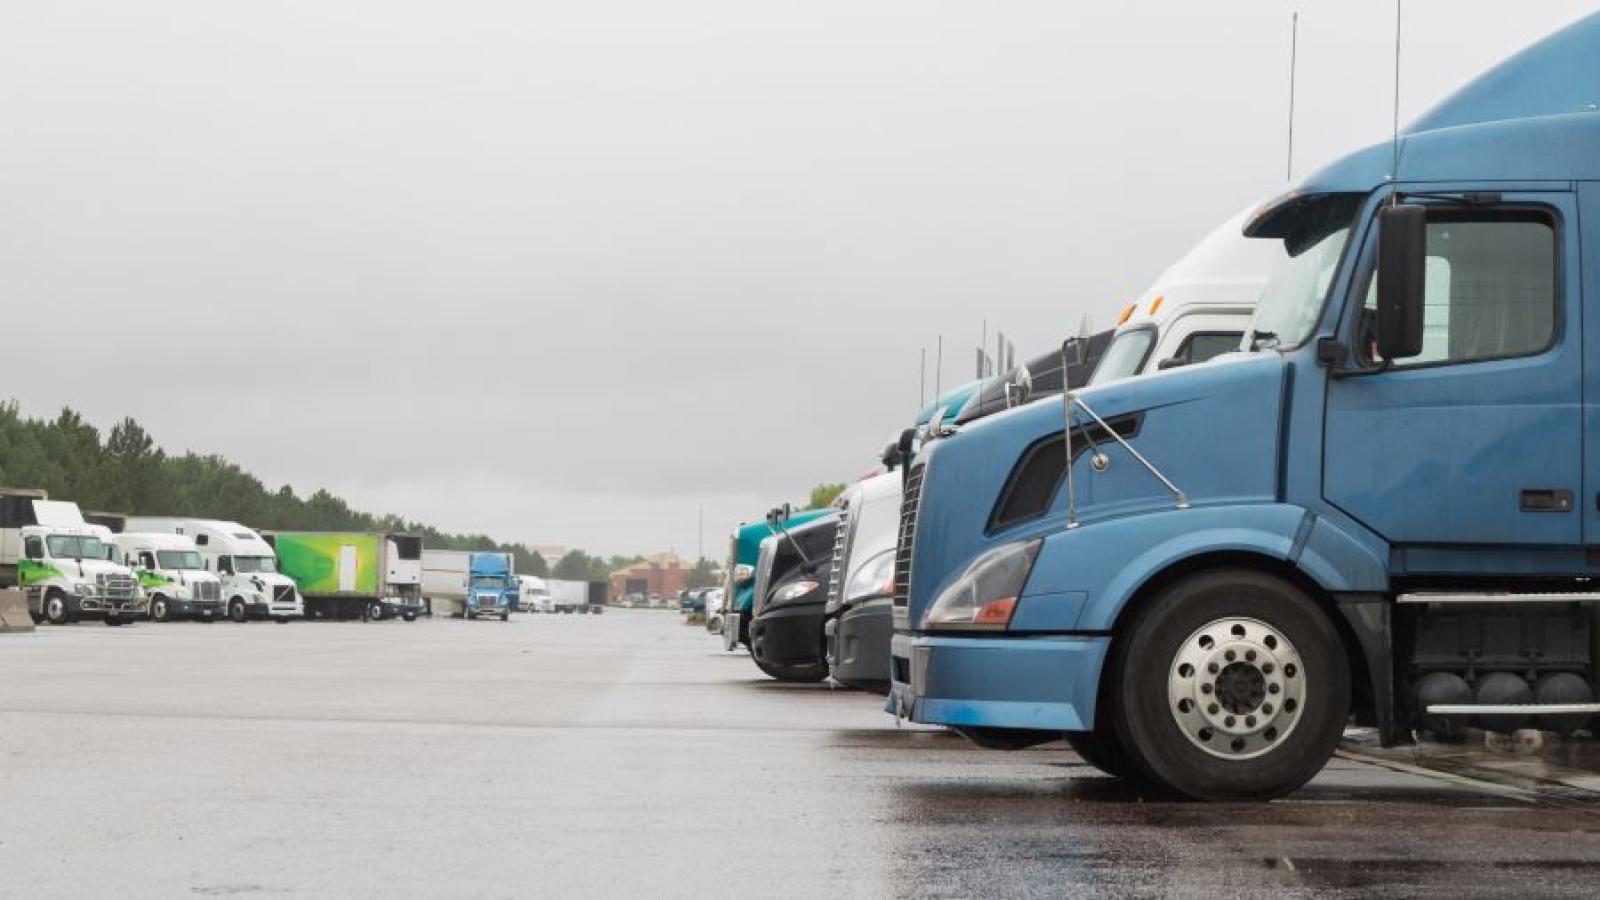 US trucking jobs shrank last month, but far less than expected